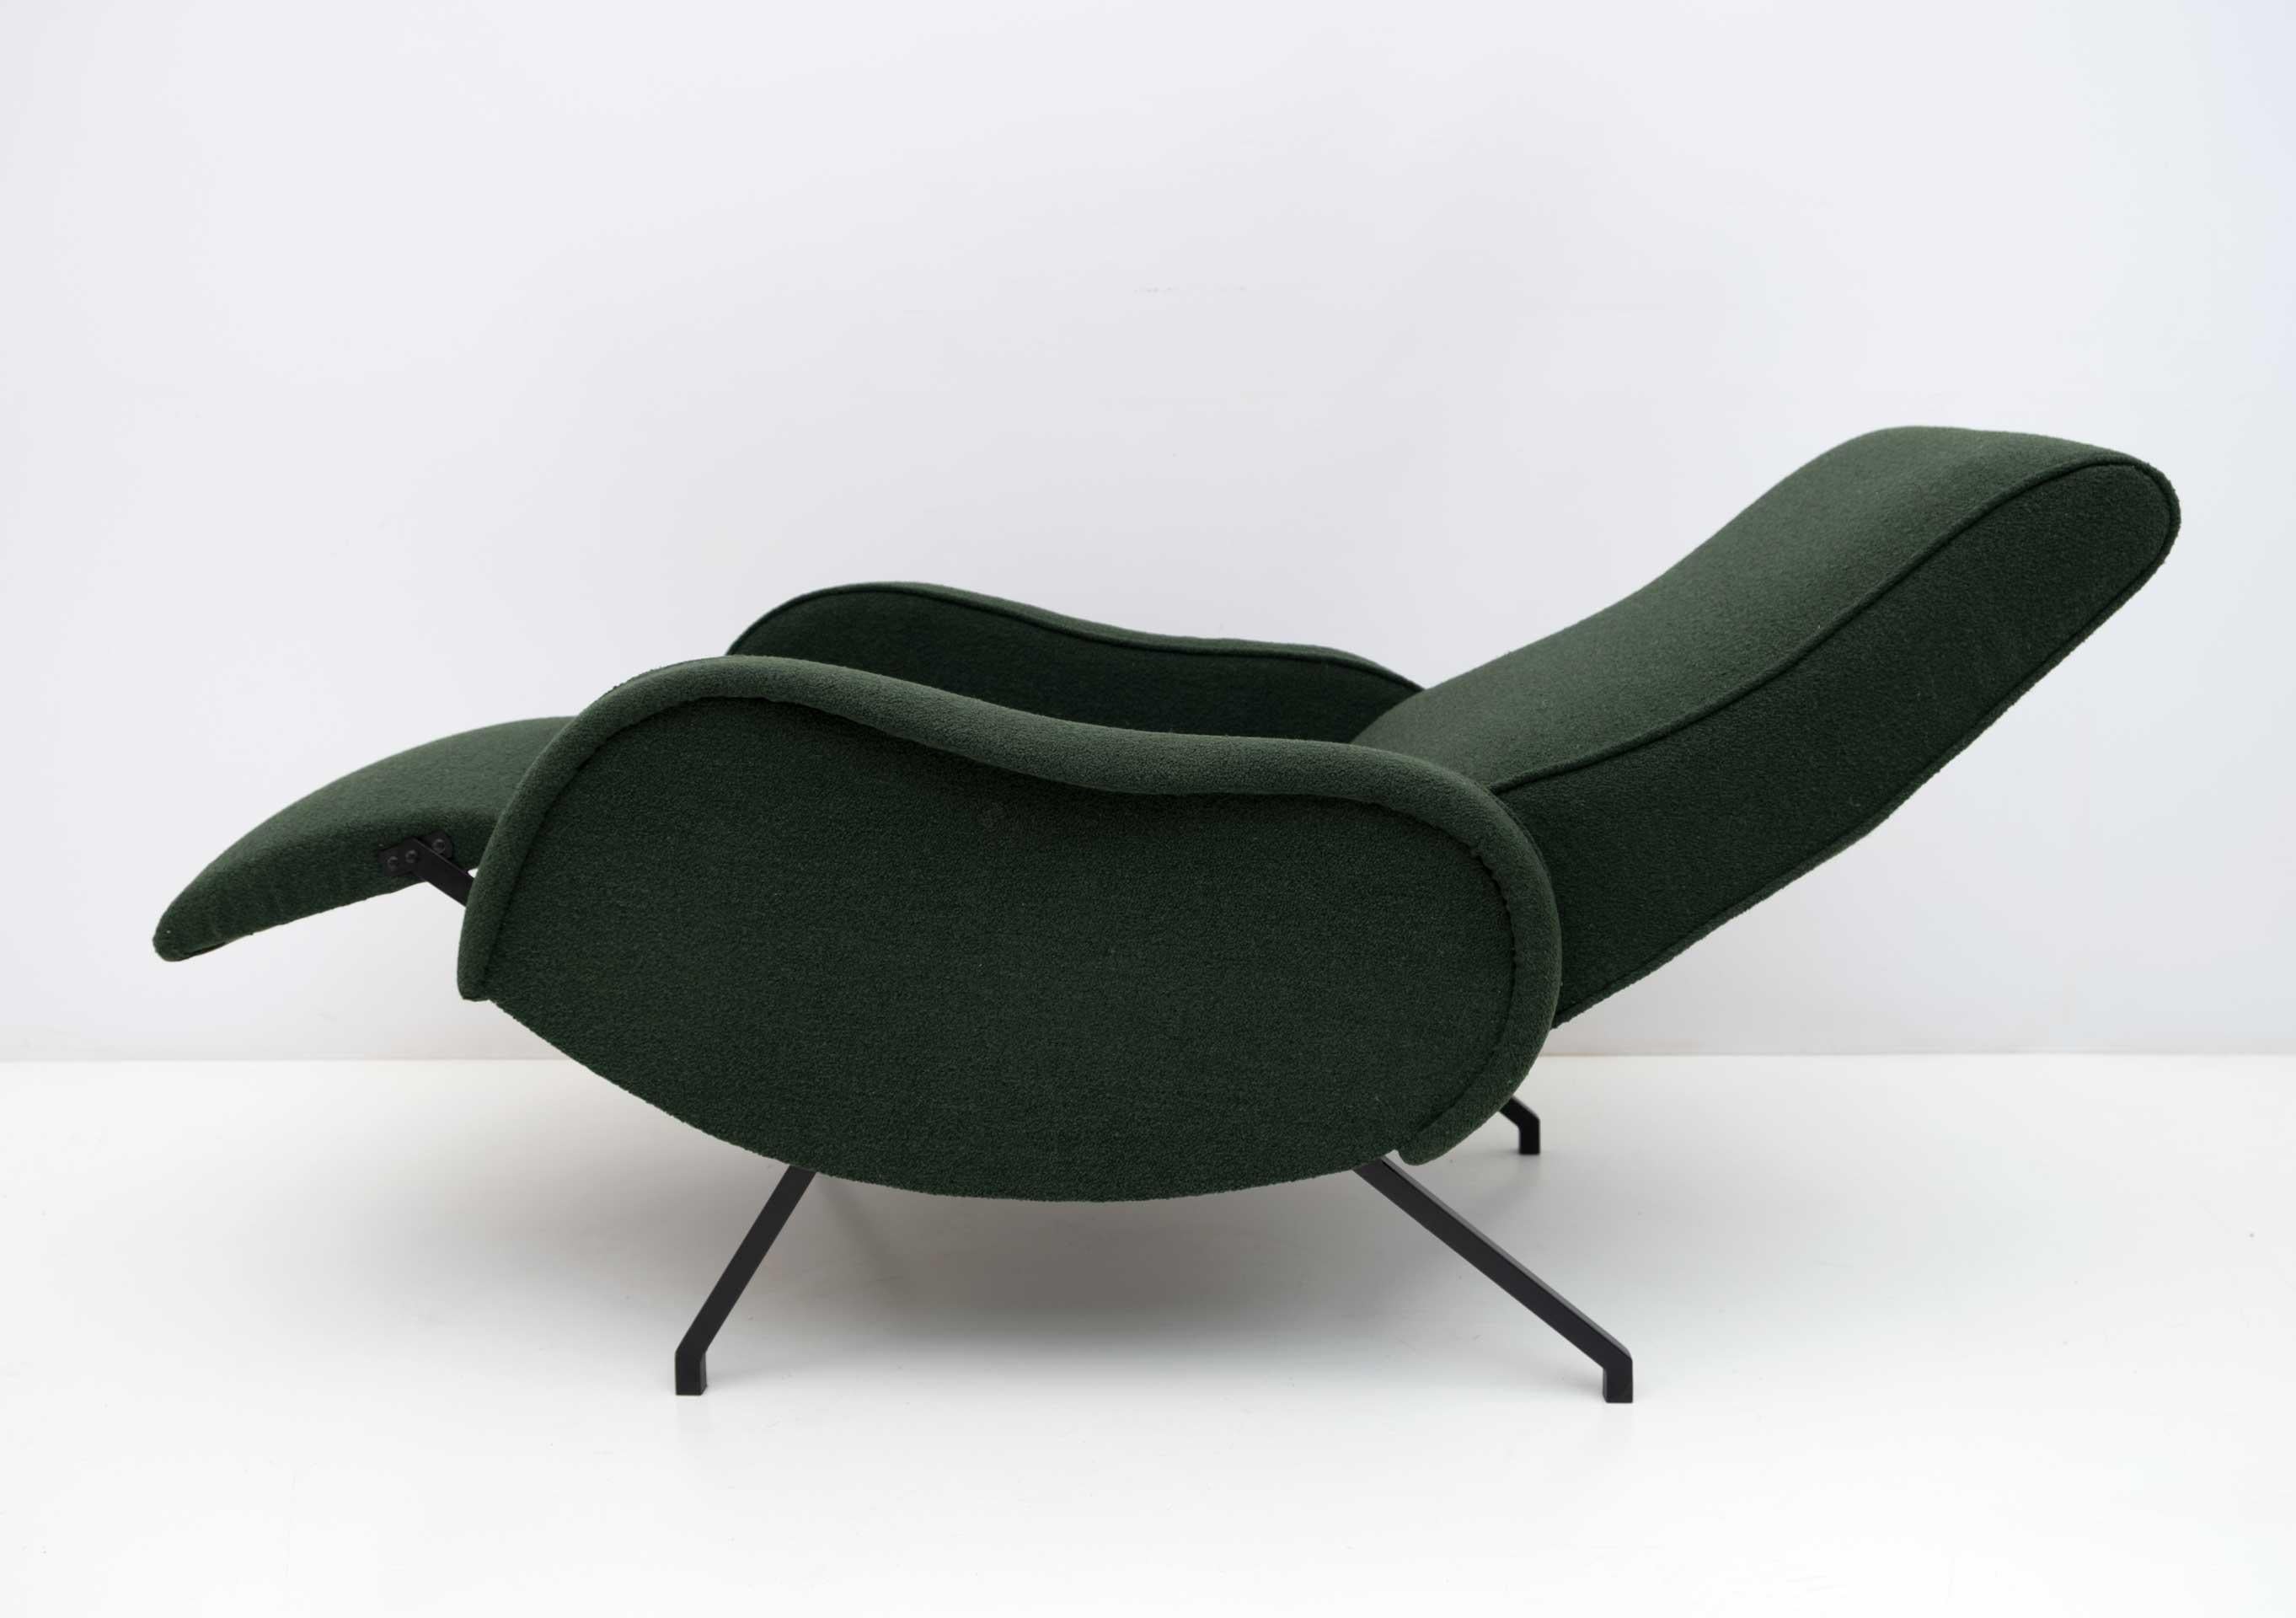 Reclining armchair designed by Marco Zanuso in the 1950s, the armchair has been restored and upholstered in English green Bouclè fabric

The extended armchair measures 150 cm.